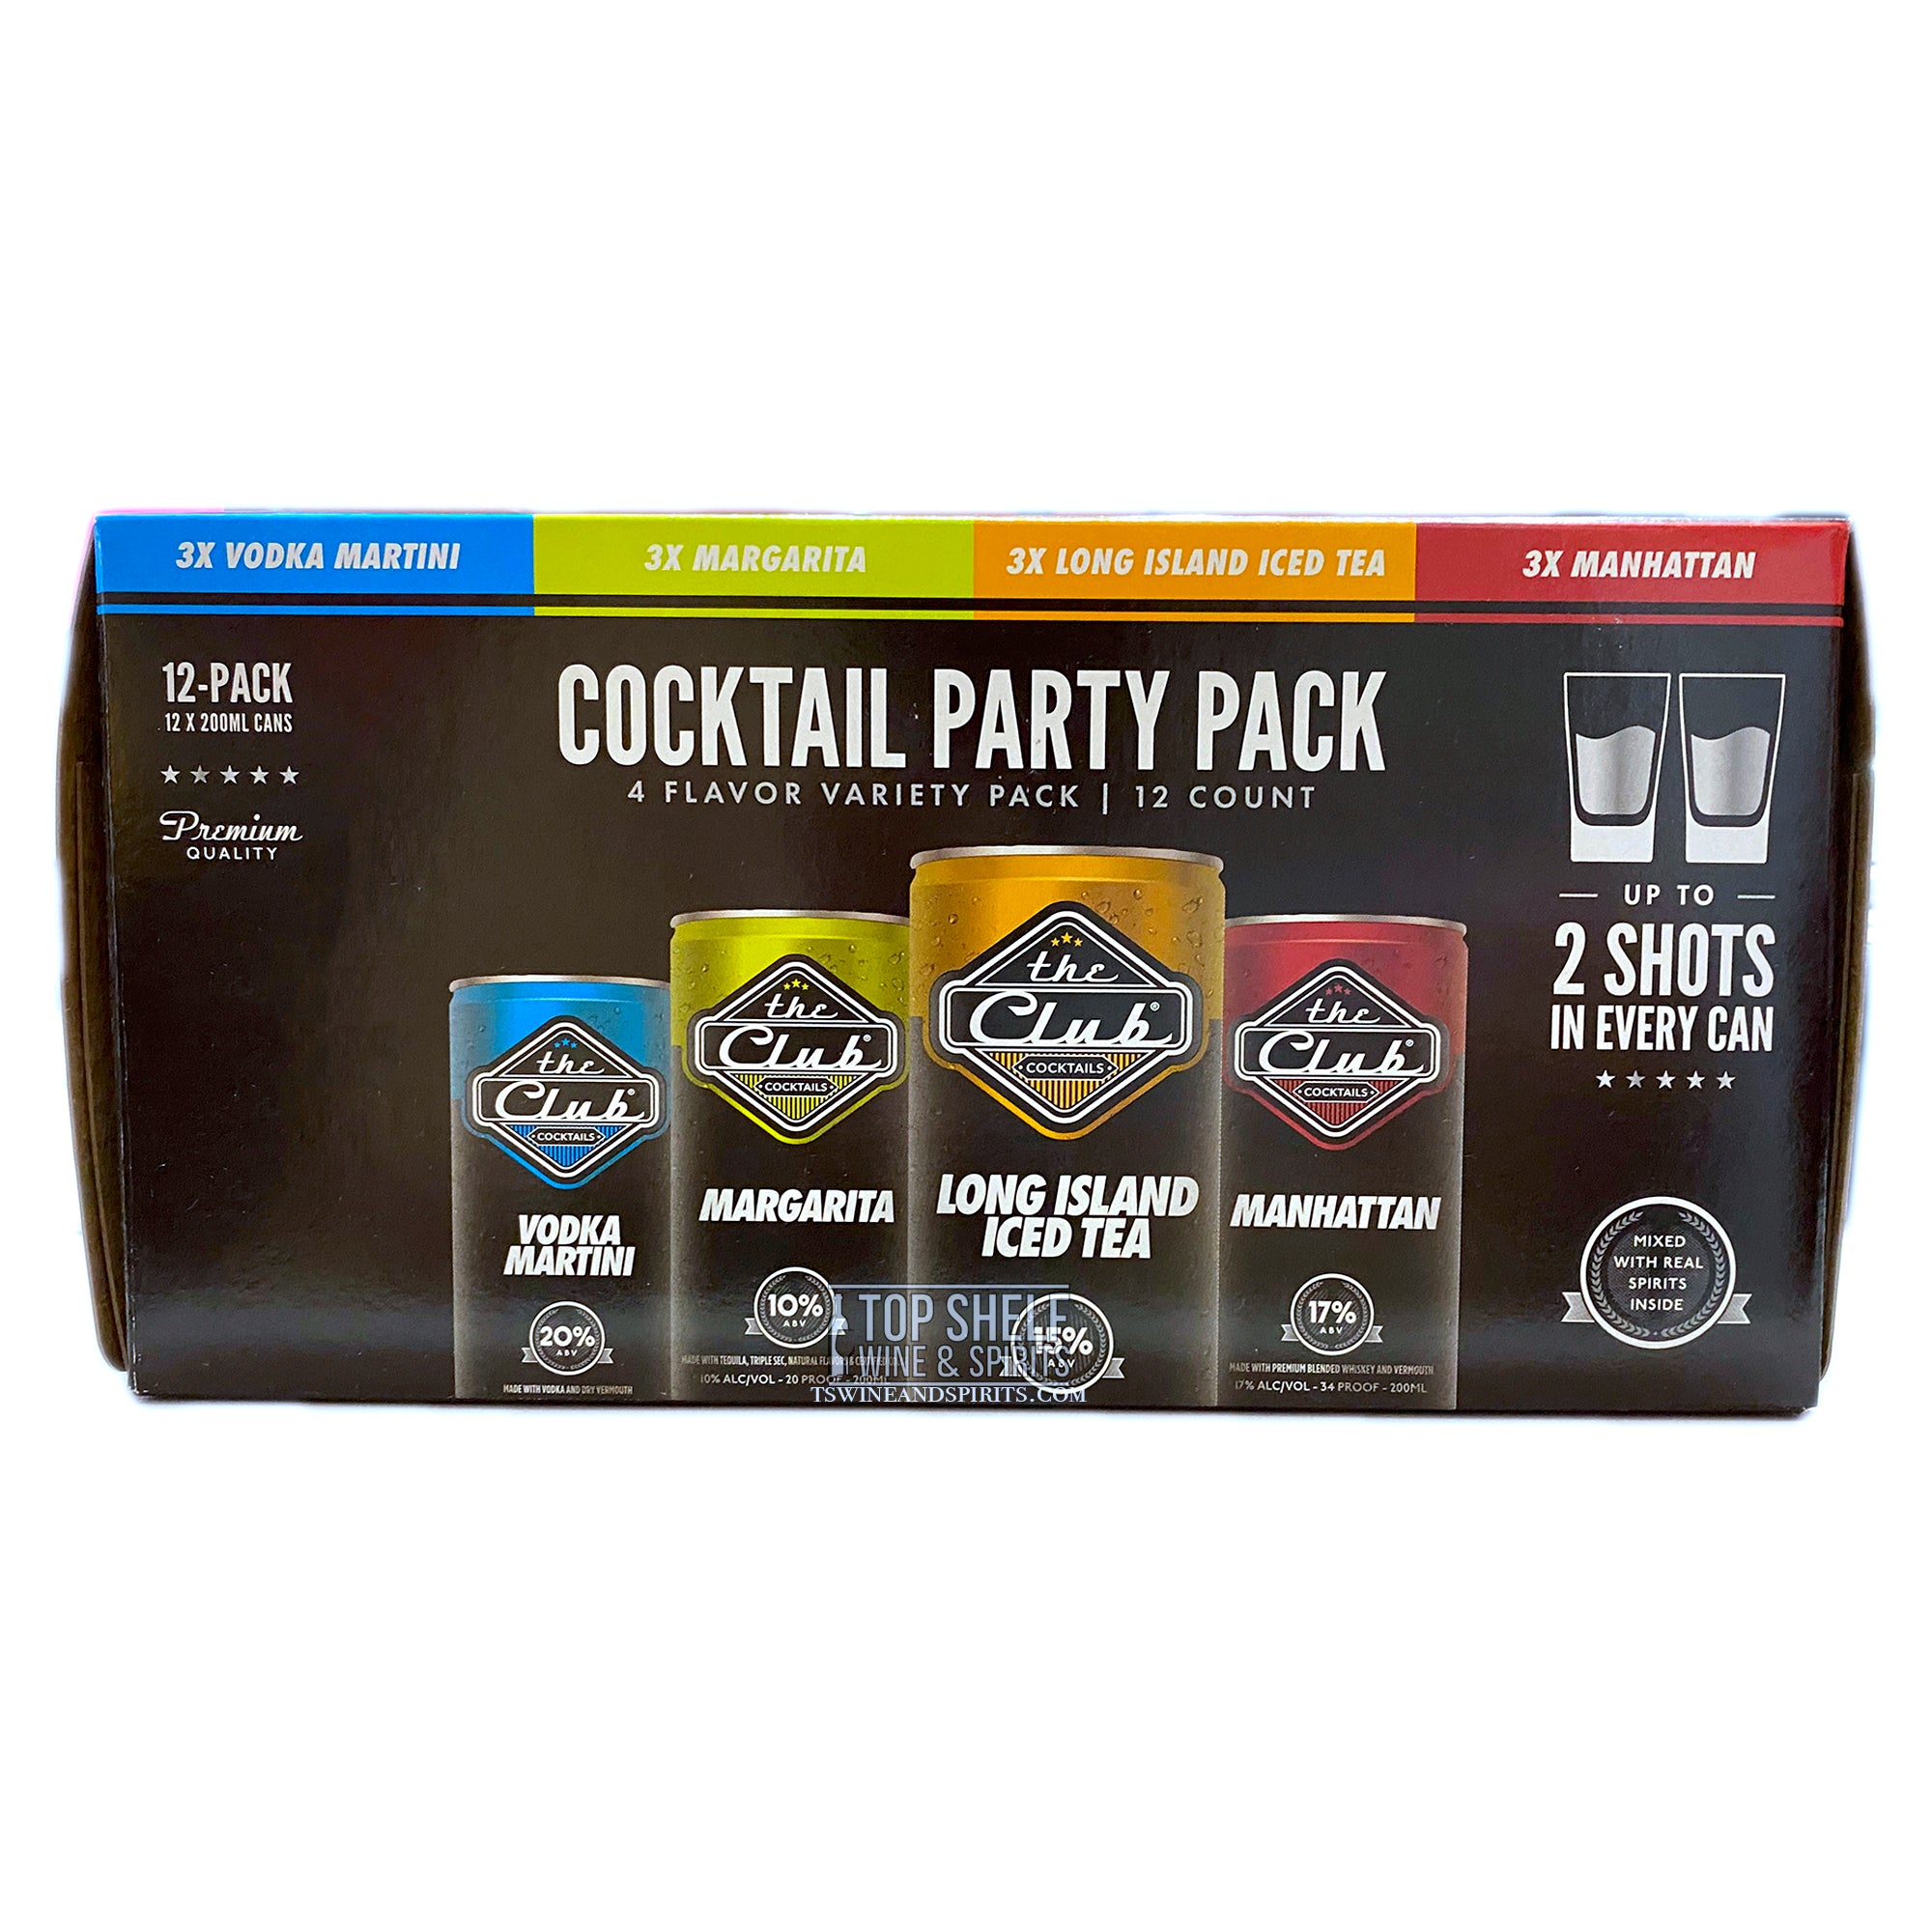 The Club Cocktail Party Pack 12 Pack Cans